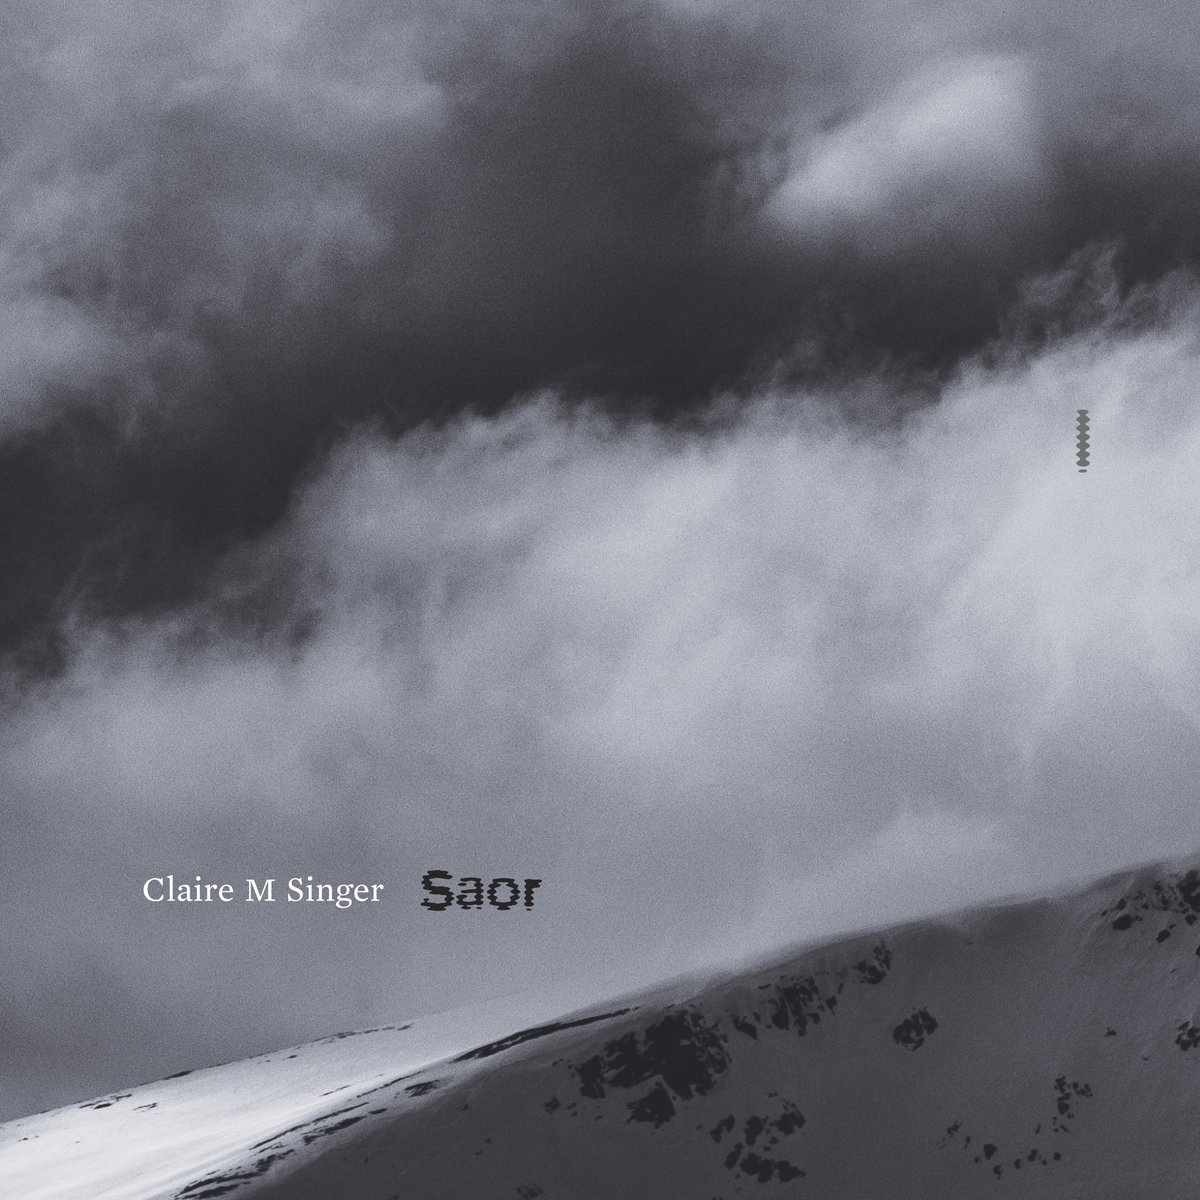 You can read an interview with @clairemsinger in @The_Drouth about her new album 'Saor' here | thedrouth.org/claire-m-singe… #saor #organmusic